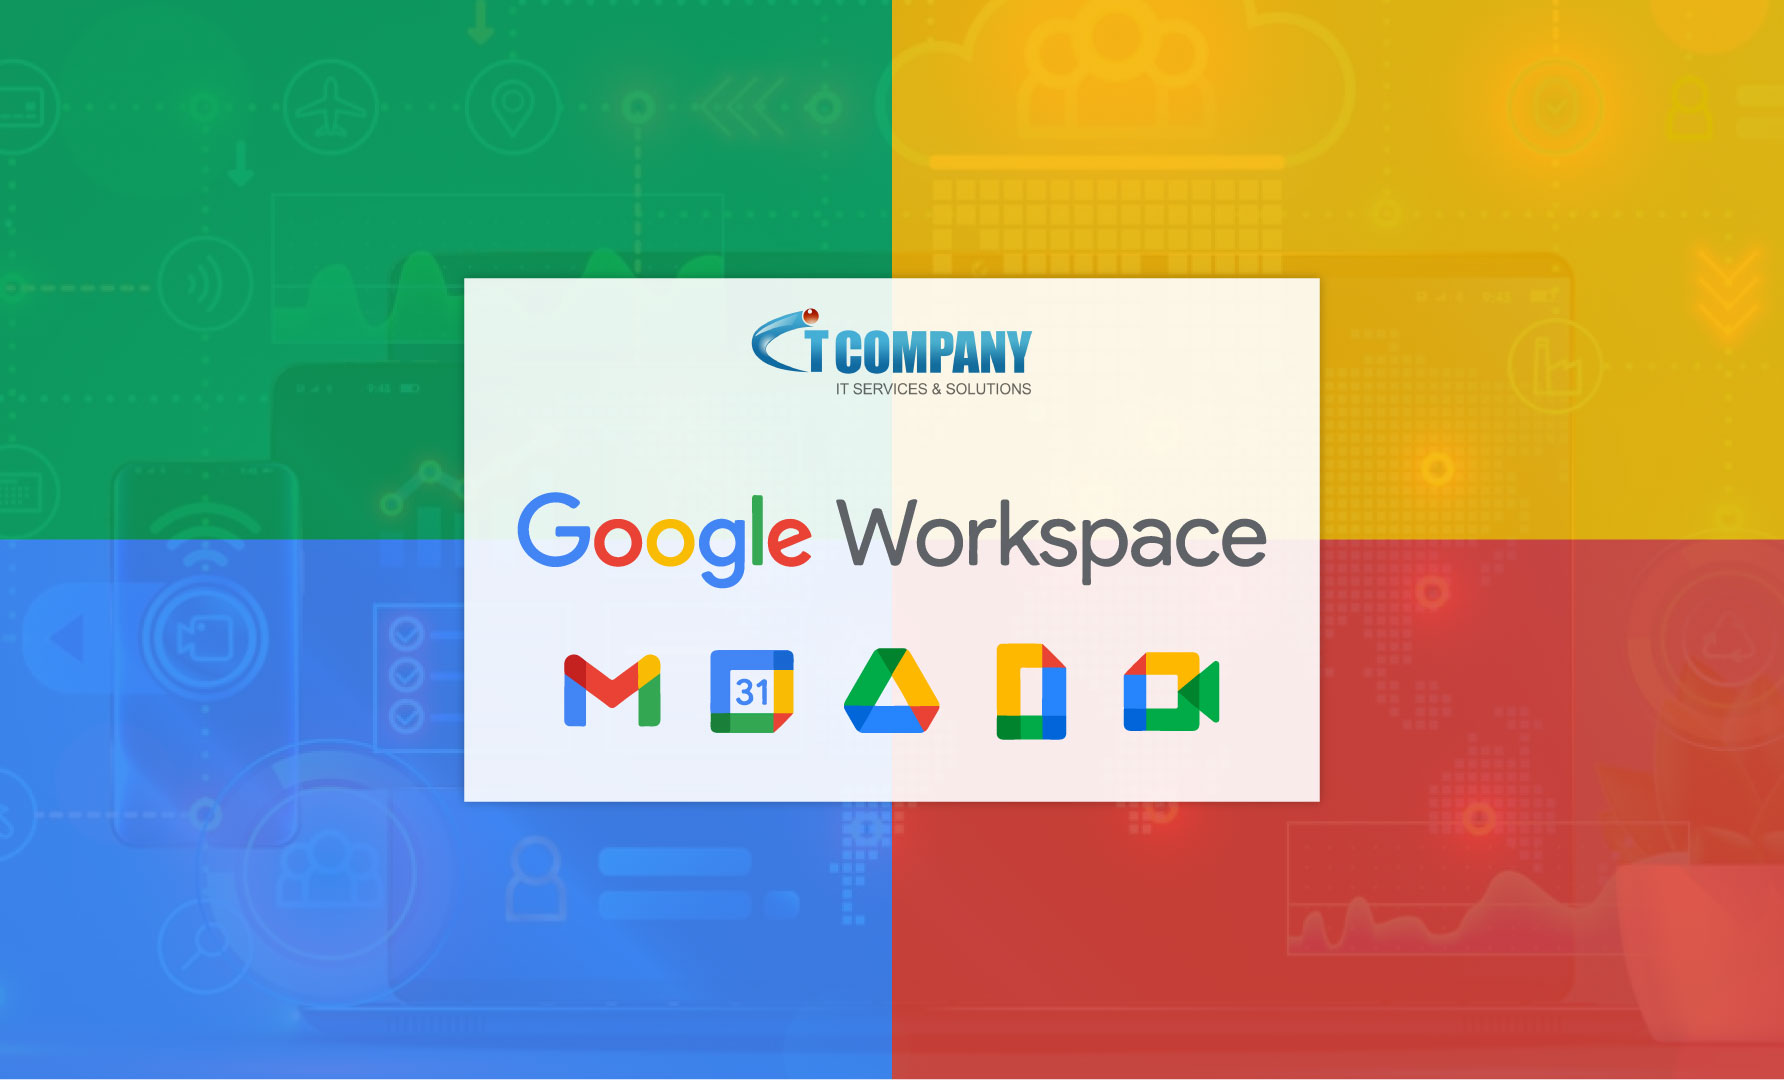 Google Workspace is the safest option for your workplace